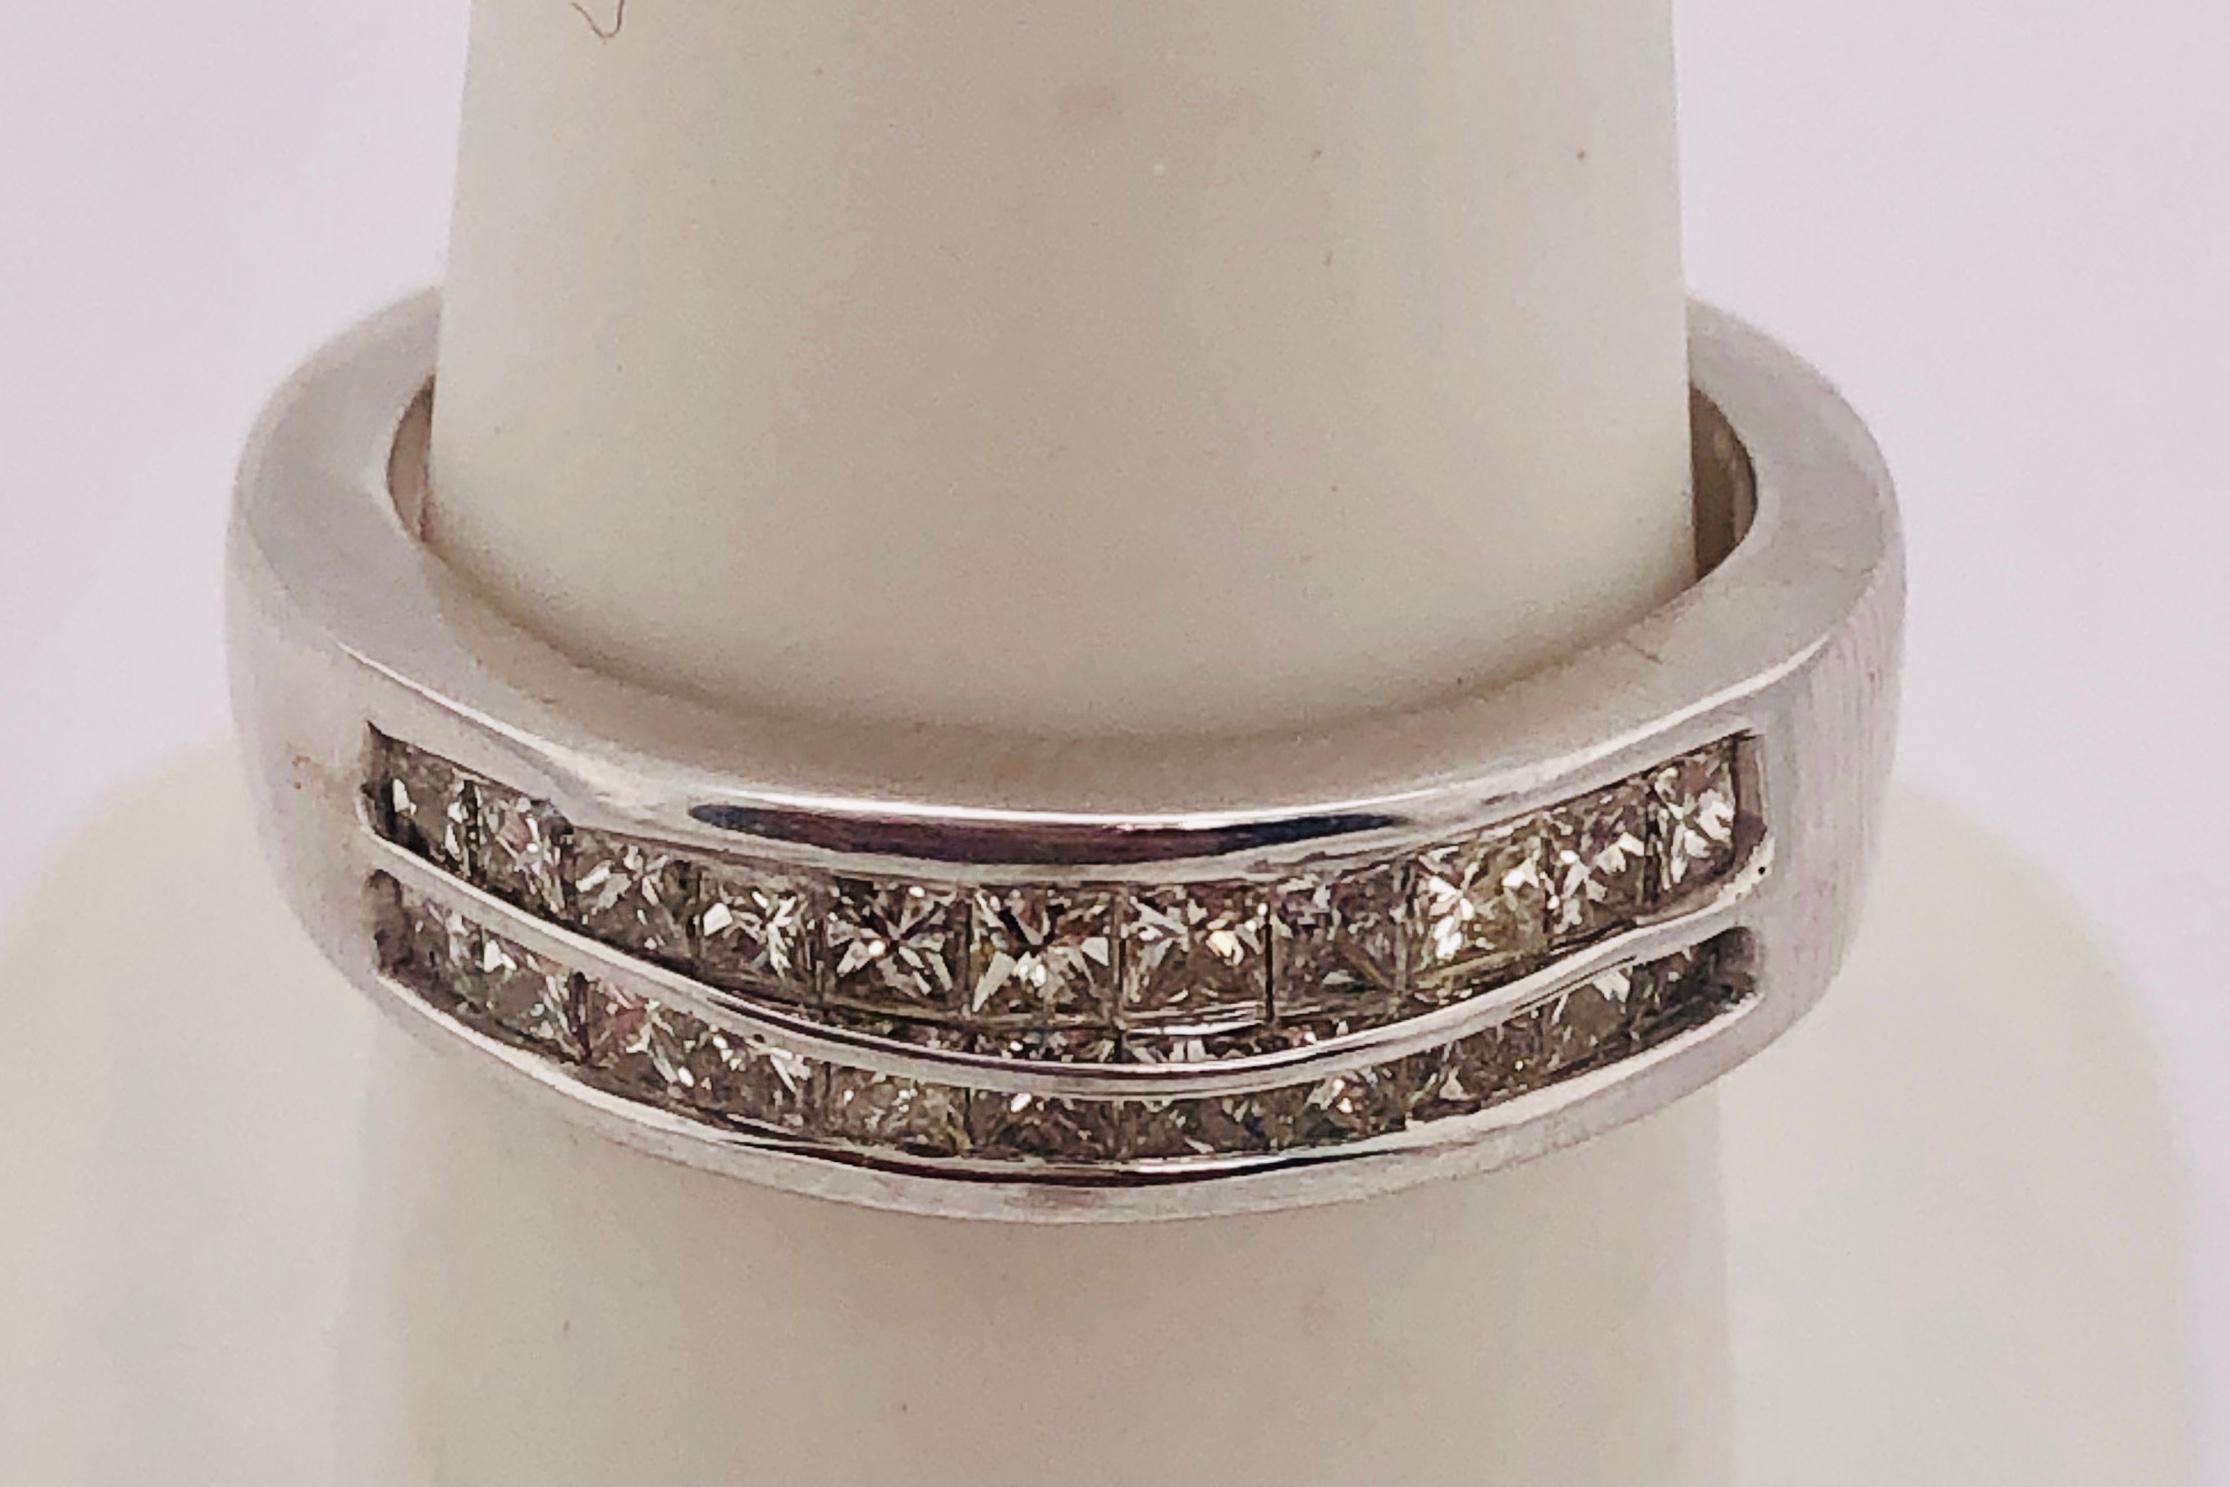 14Kt White Gold Diamond Wedding Band Anniversary Bridal Ring 1.00 Total Diamond Weight
Size 6 
5.71 grams total weight.